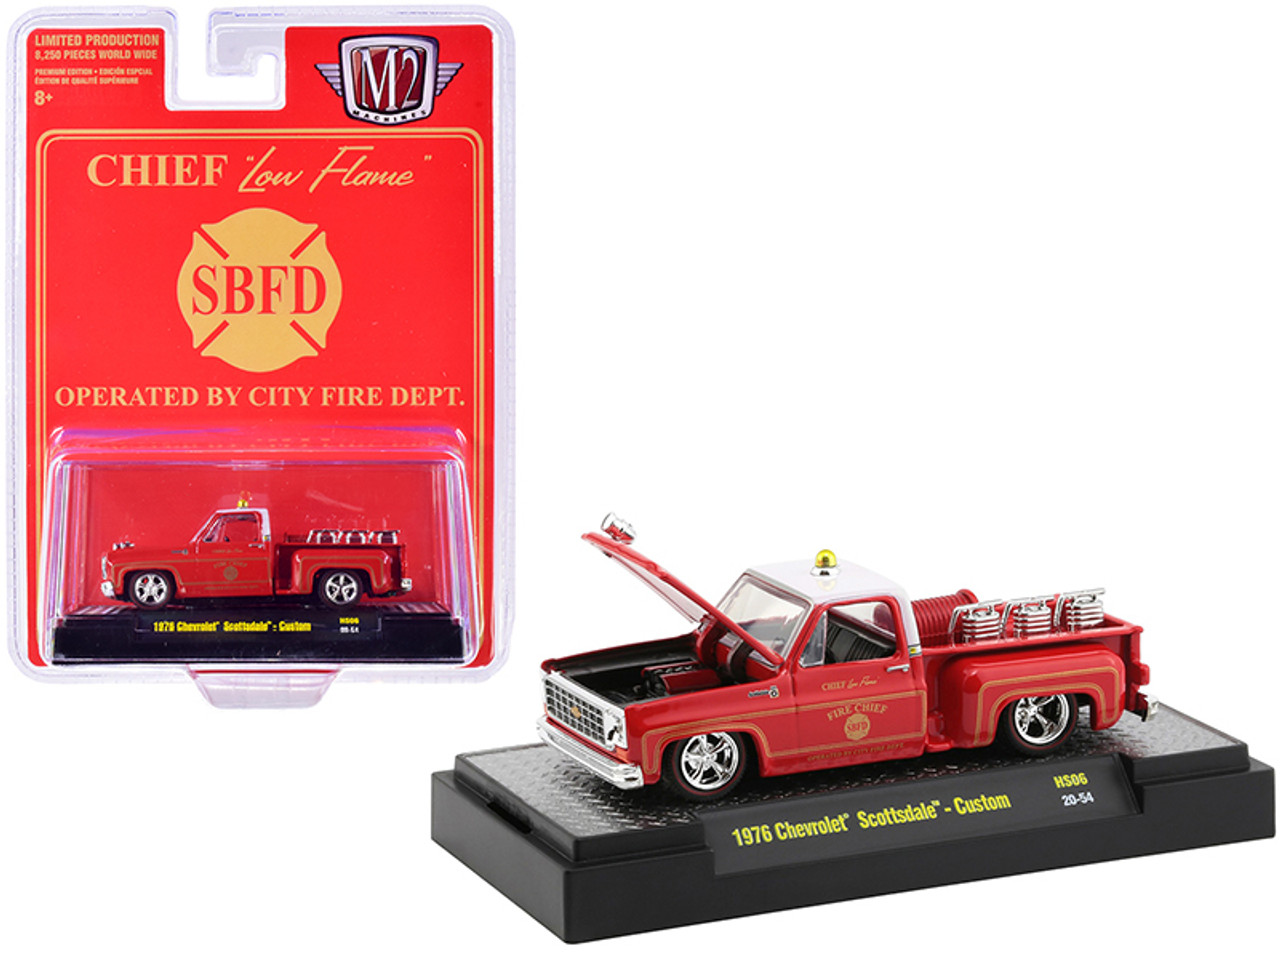 1976 Chevrolet Scottsdale Custom Square Body Fire Truck Red Fire Chief "Low Flame" "SBFD Operated by City Fire Department" Limited Edition to 8250 pieces Worldwide 1/64 Diecast Model Car by M2 Machines